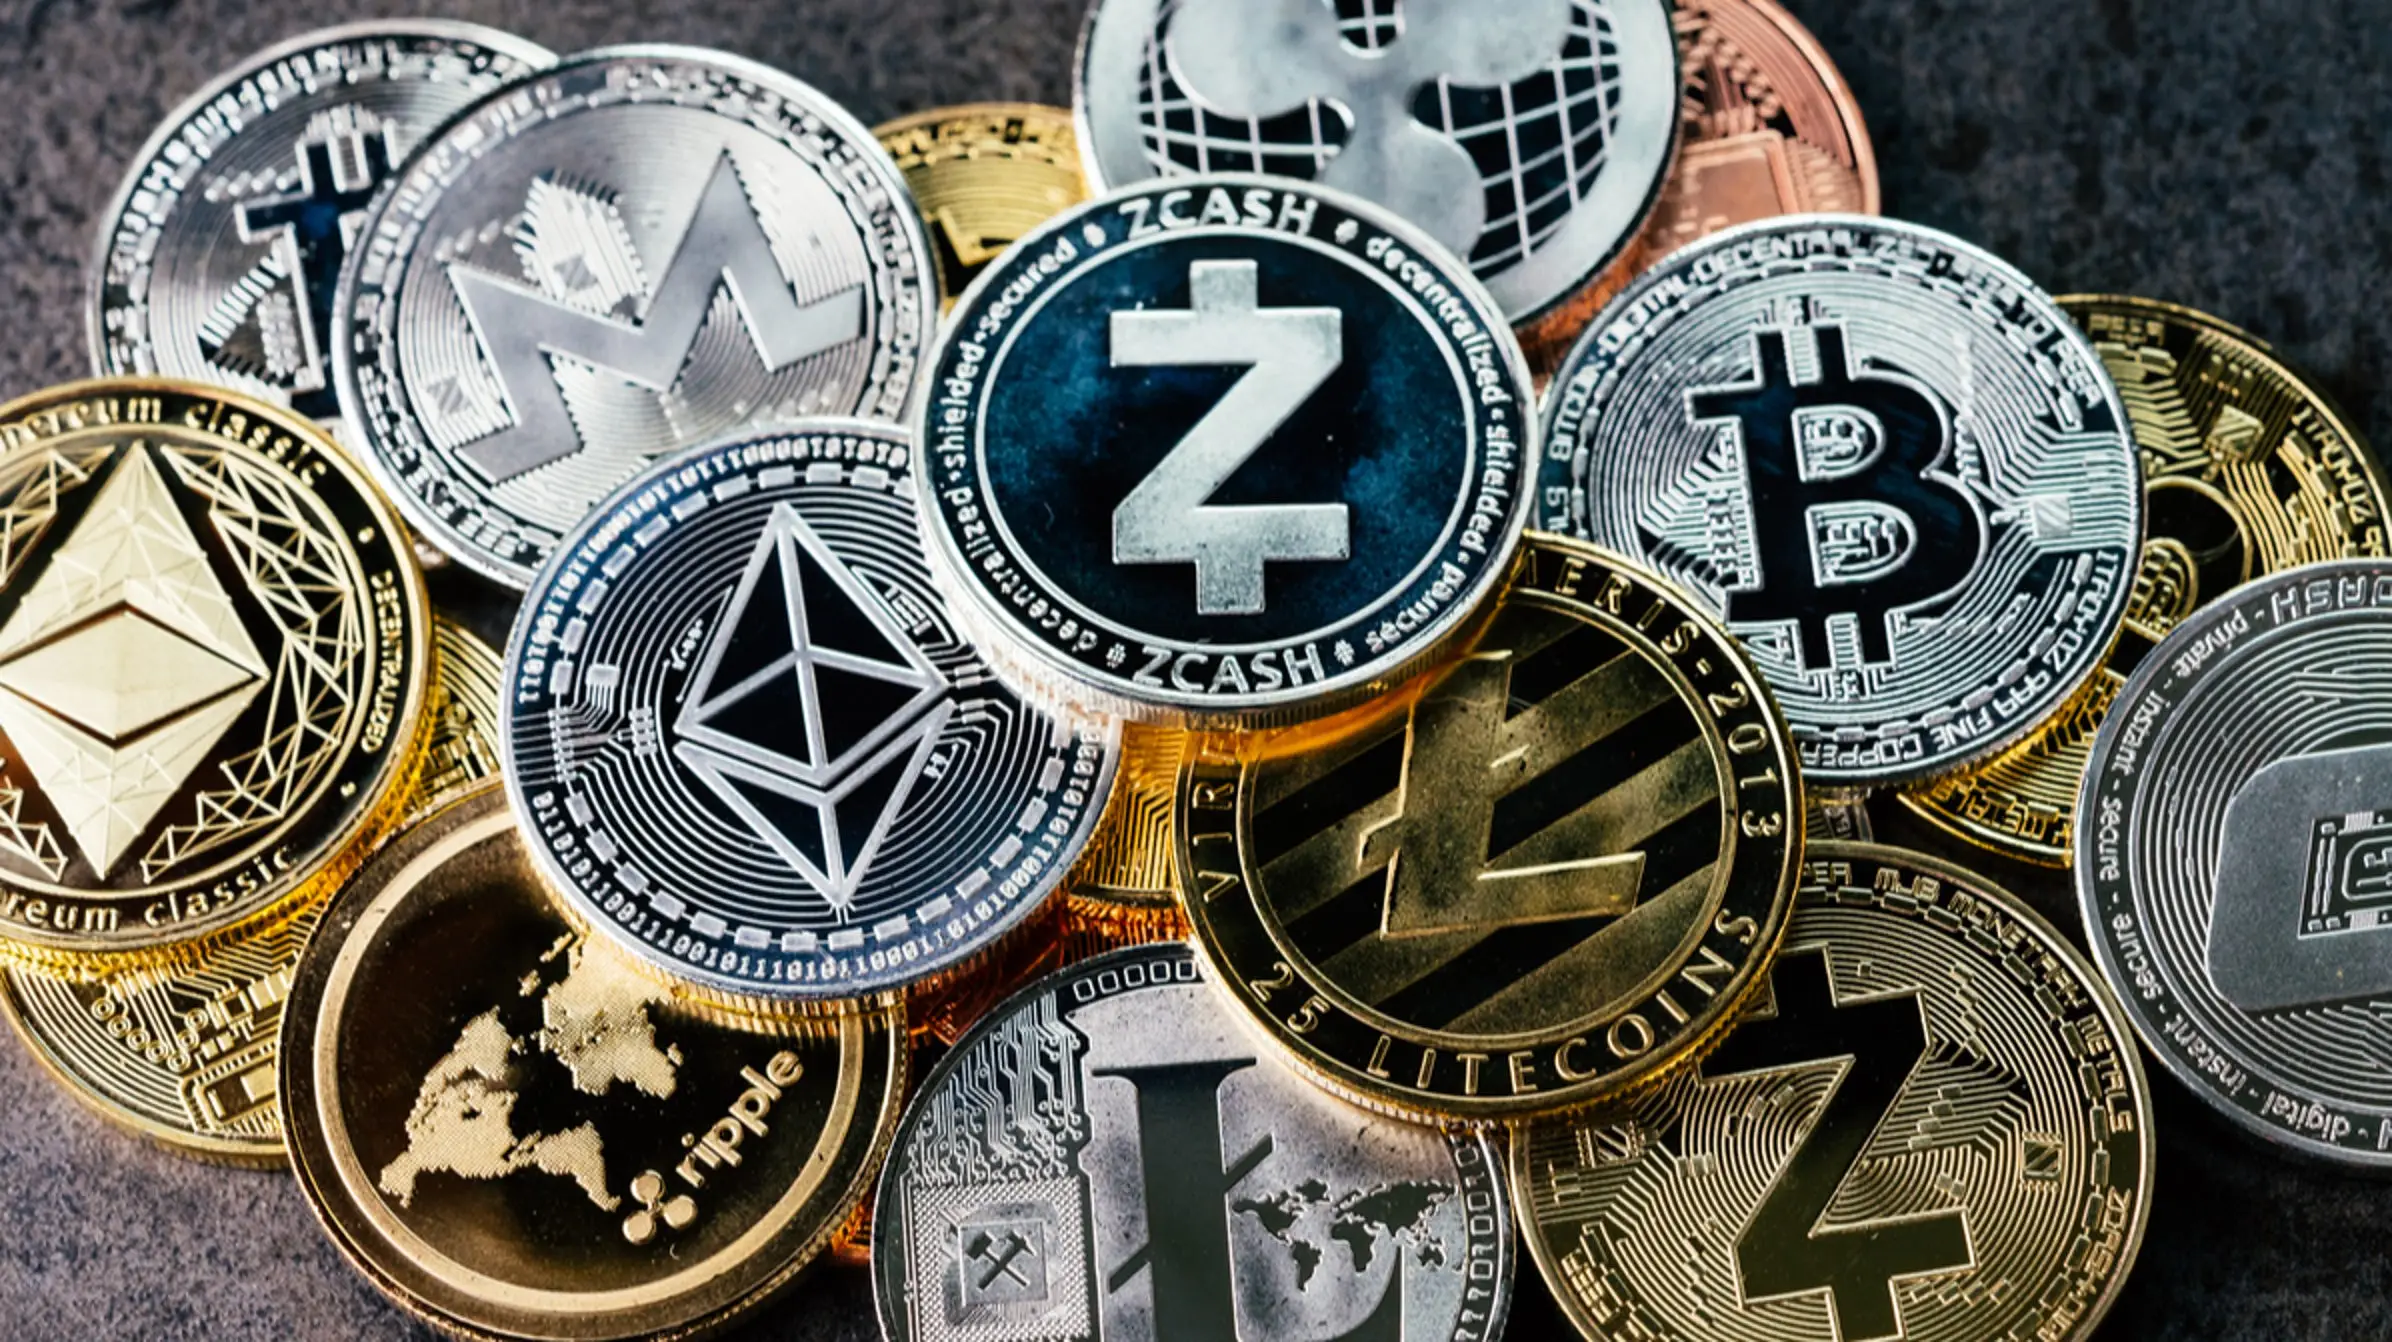 The 5 Most Popular Cryptocurrencies of the Week